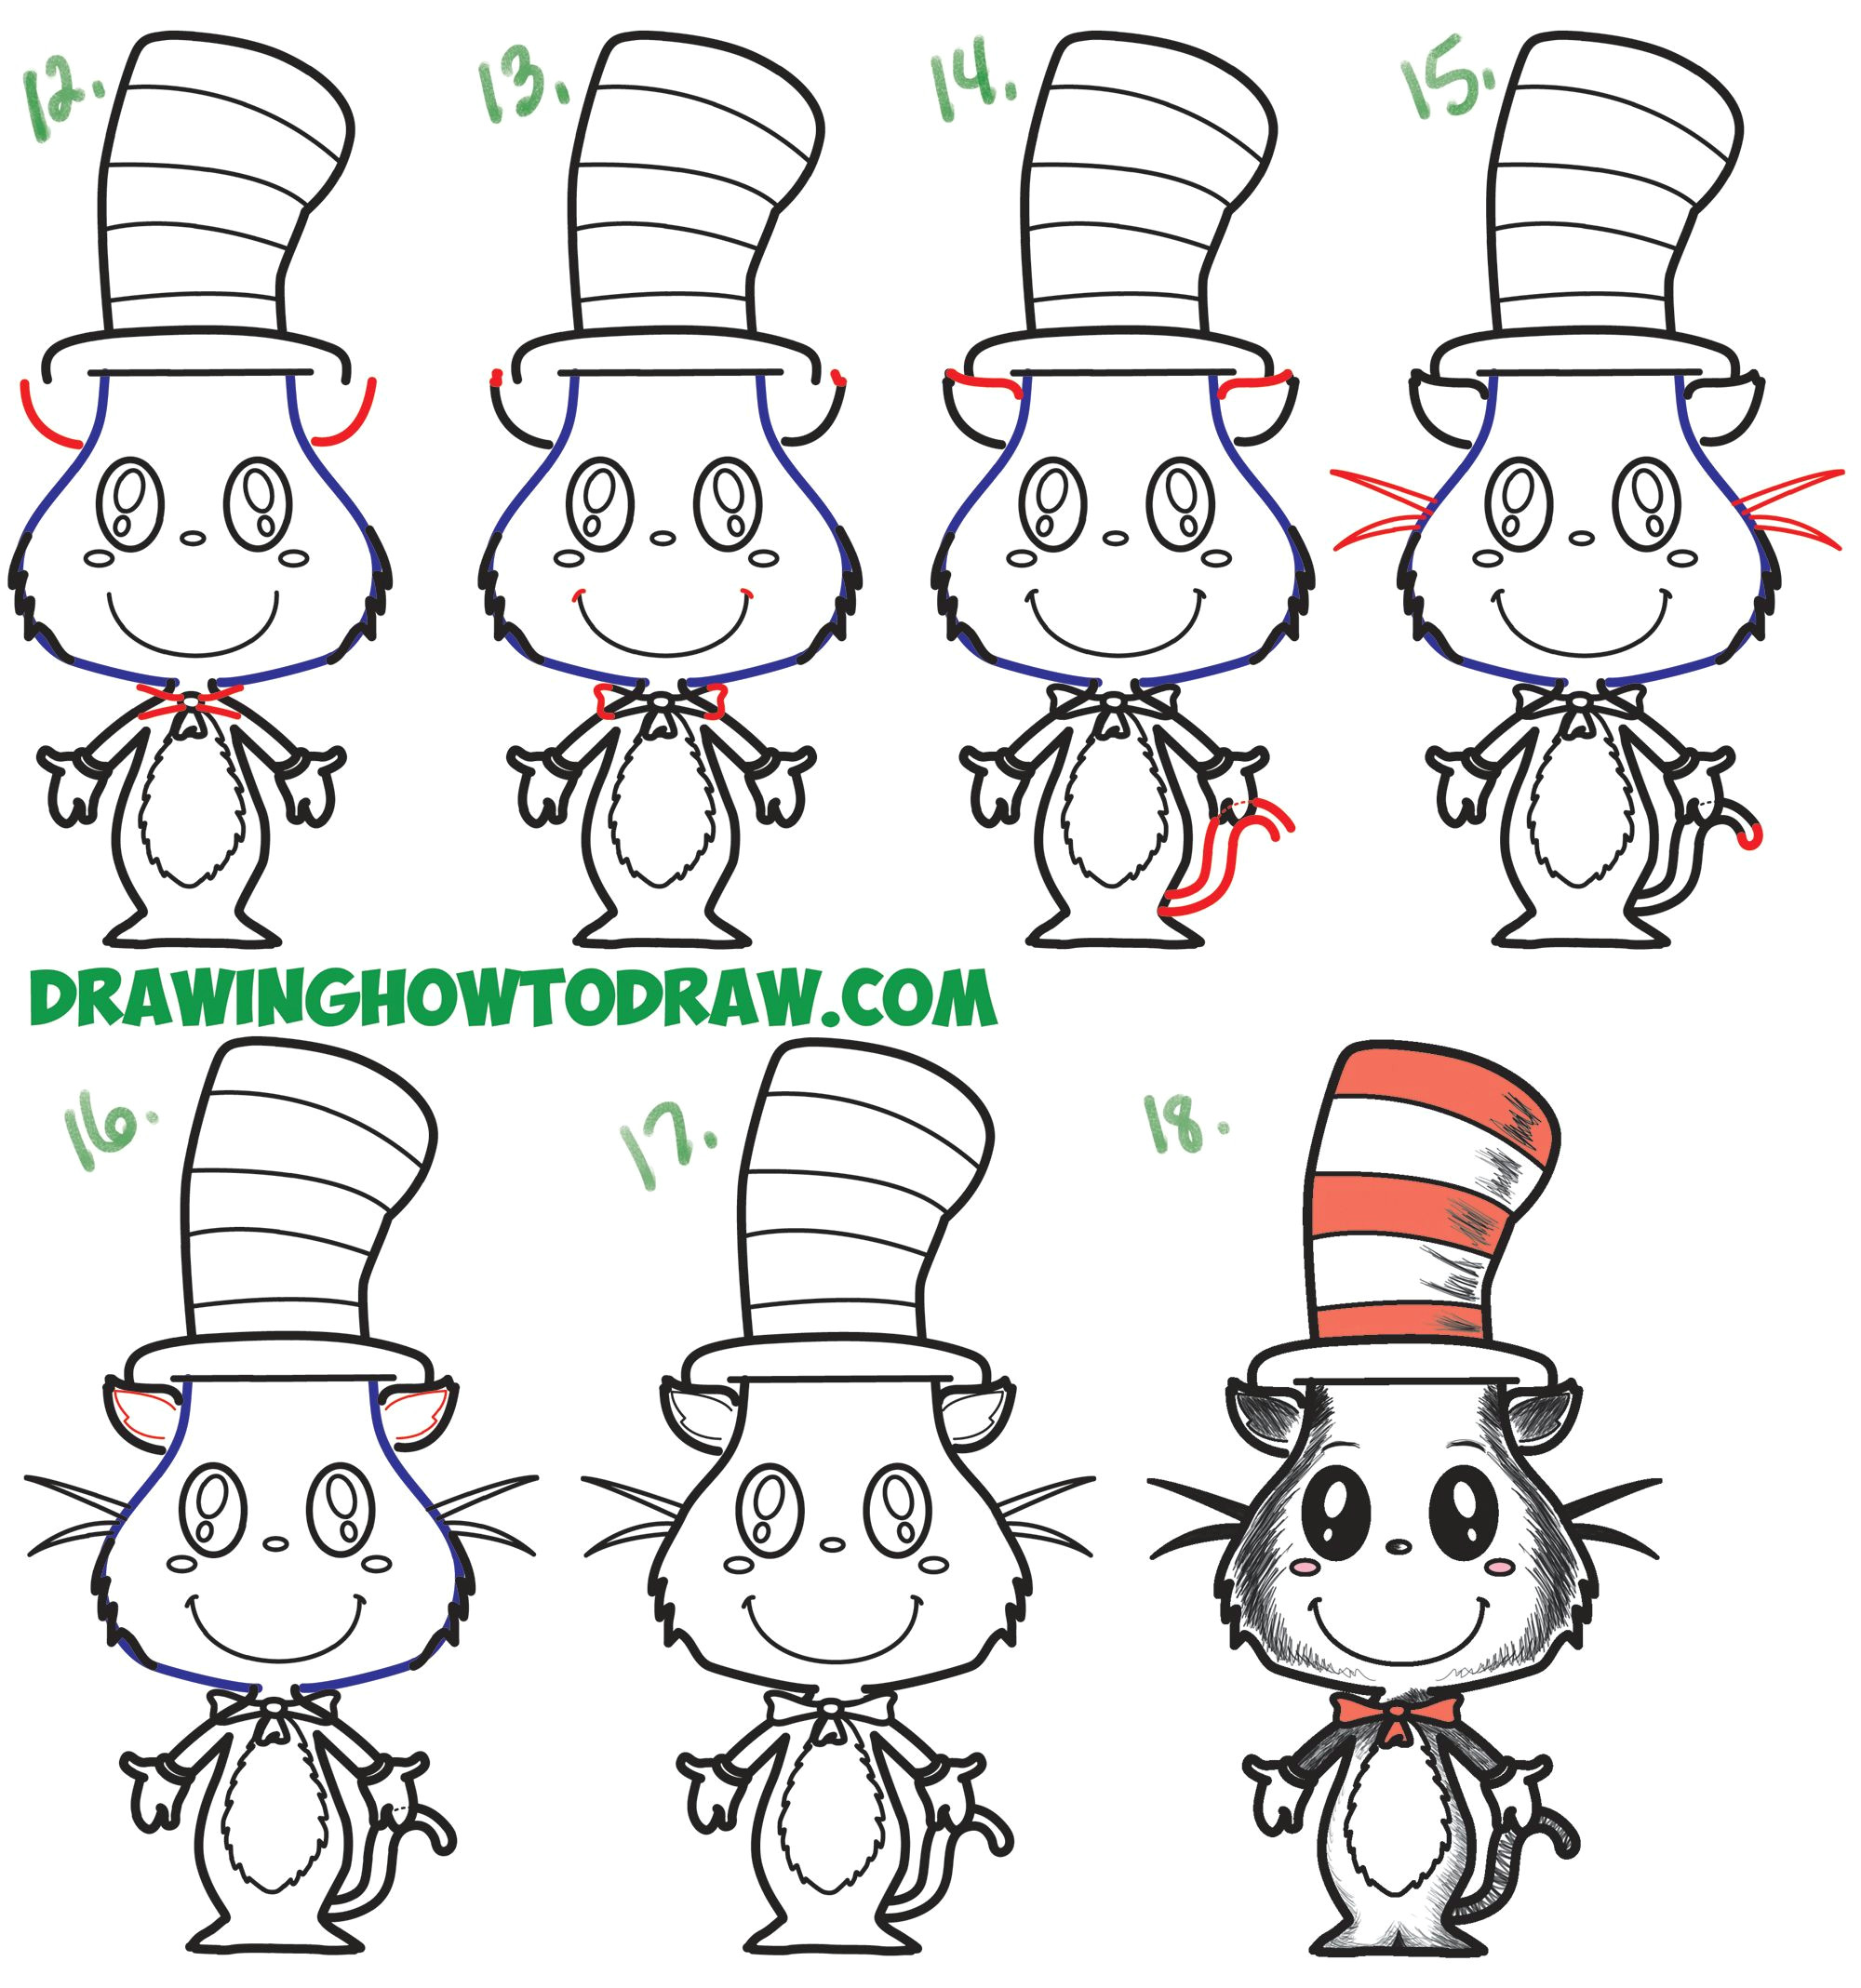 Drawing Zebra Step by Step How to Draw the Cat In the Hat Cute Kawaii Chibi Version Easy